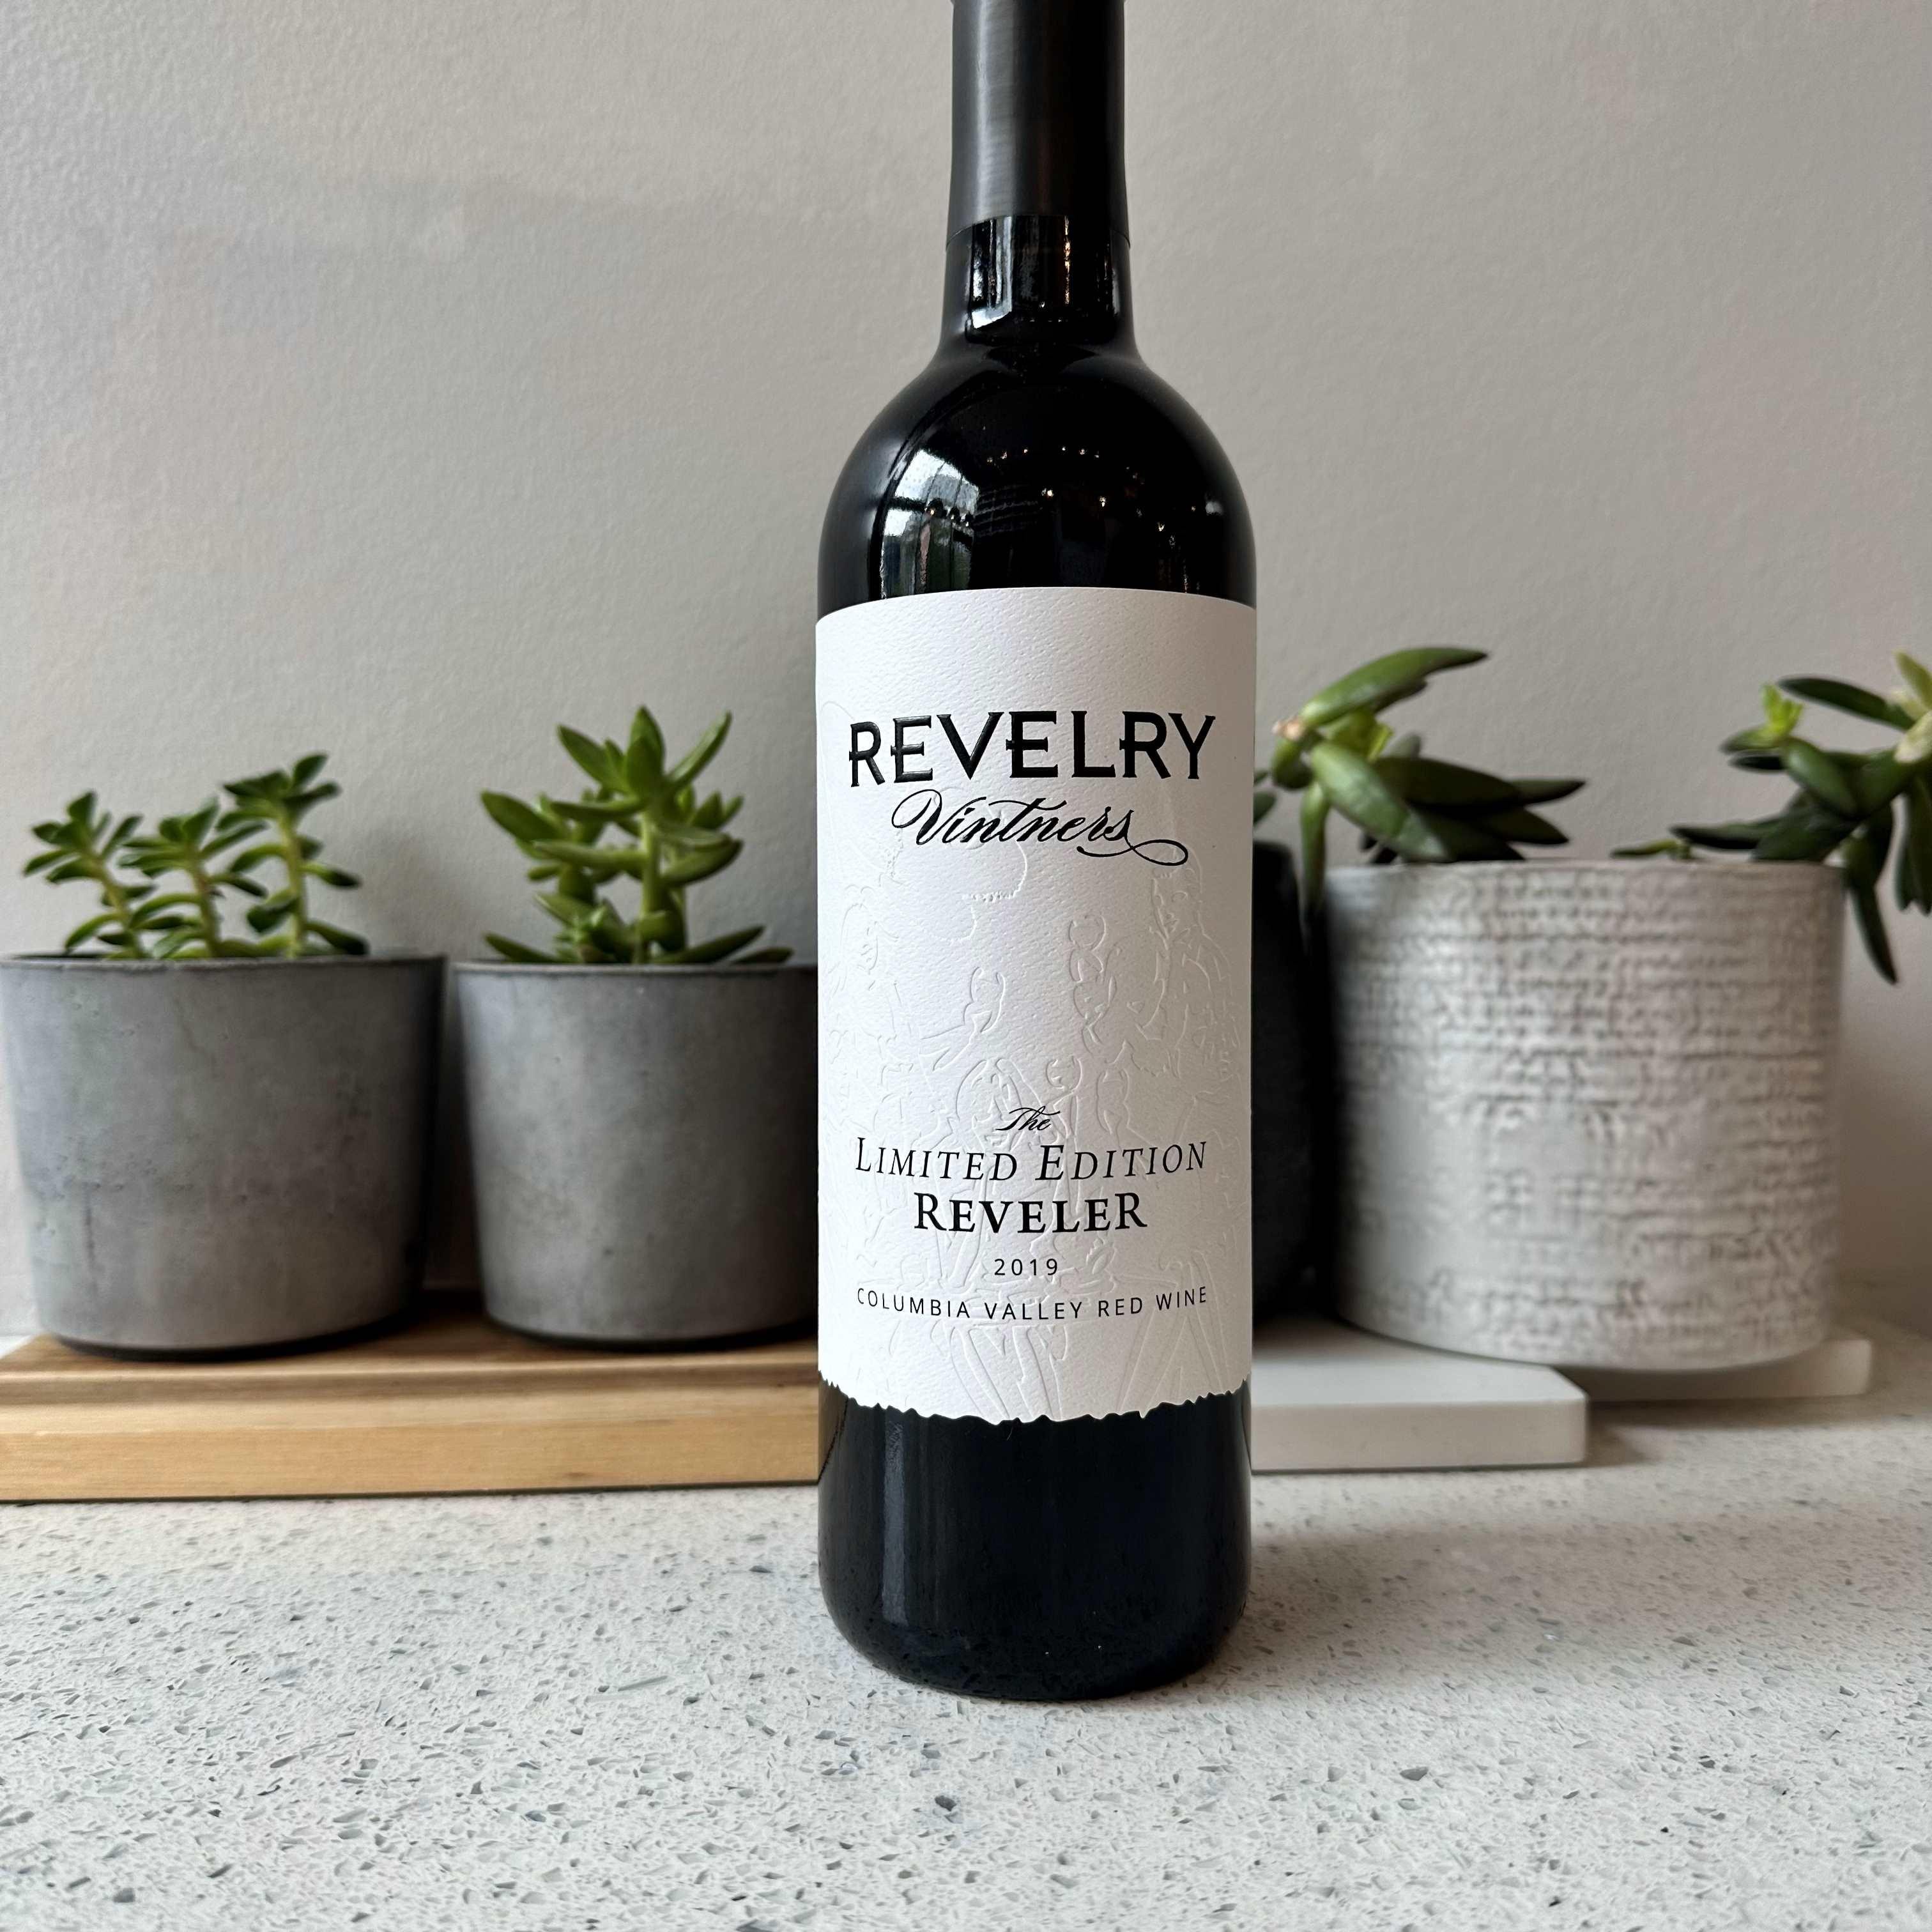 Revelry Vintners "The Limited Edition Reveler" Red Blend 2019 Columbia Valley, Washington